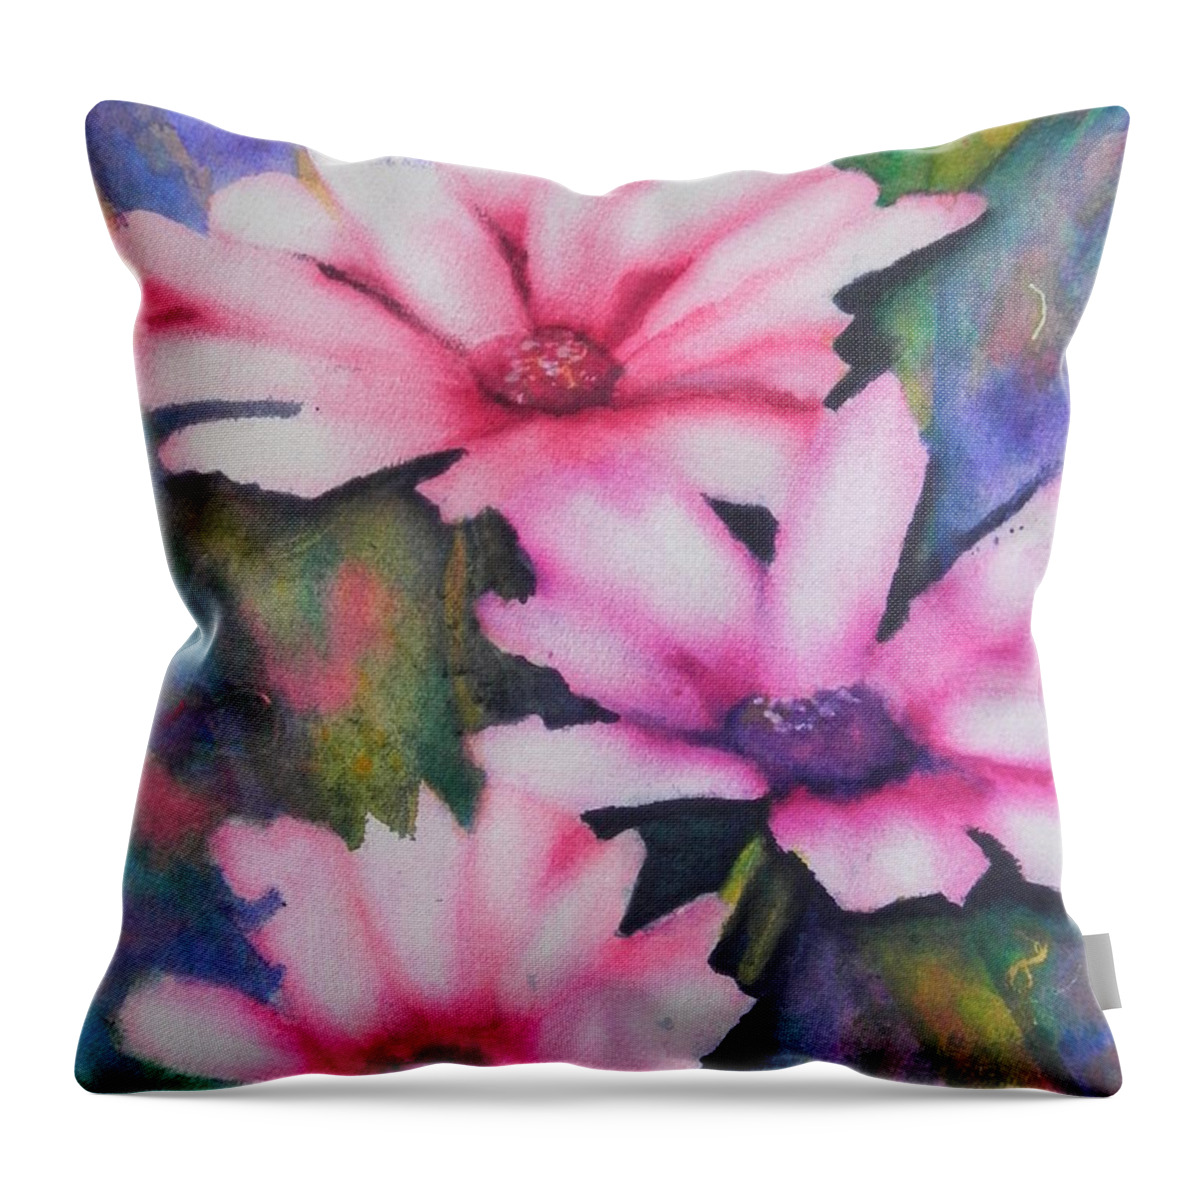 Fine Art Painting Throw Pillow featuring the painting A Touch Of Pink by Chrisann Ellis